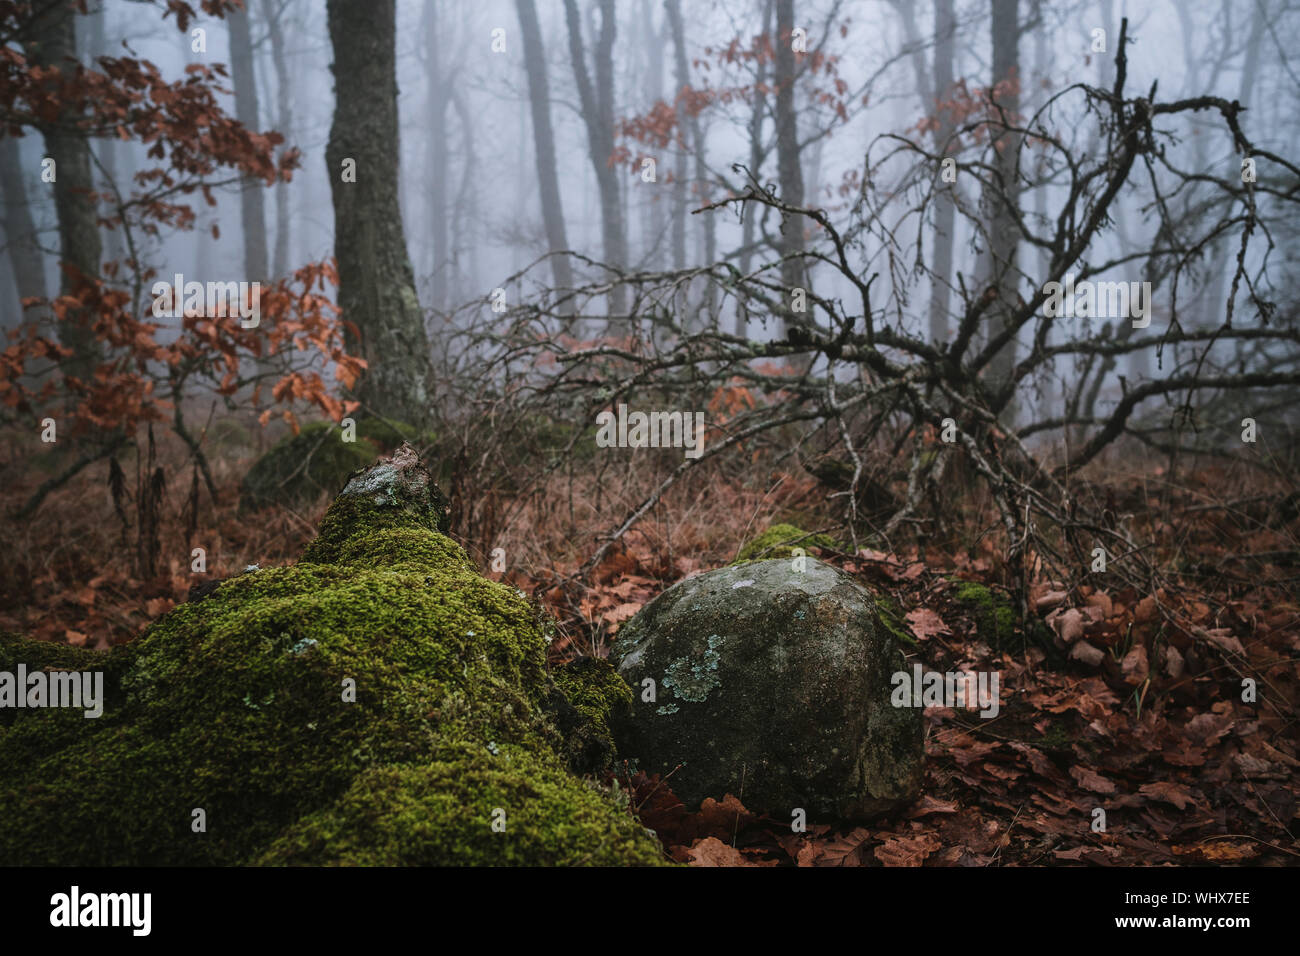 Forest In The Fog Dark Misty Forest In Southern Germany At Late Autumn Background Illustration Concept Stock Photo Alamy